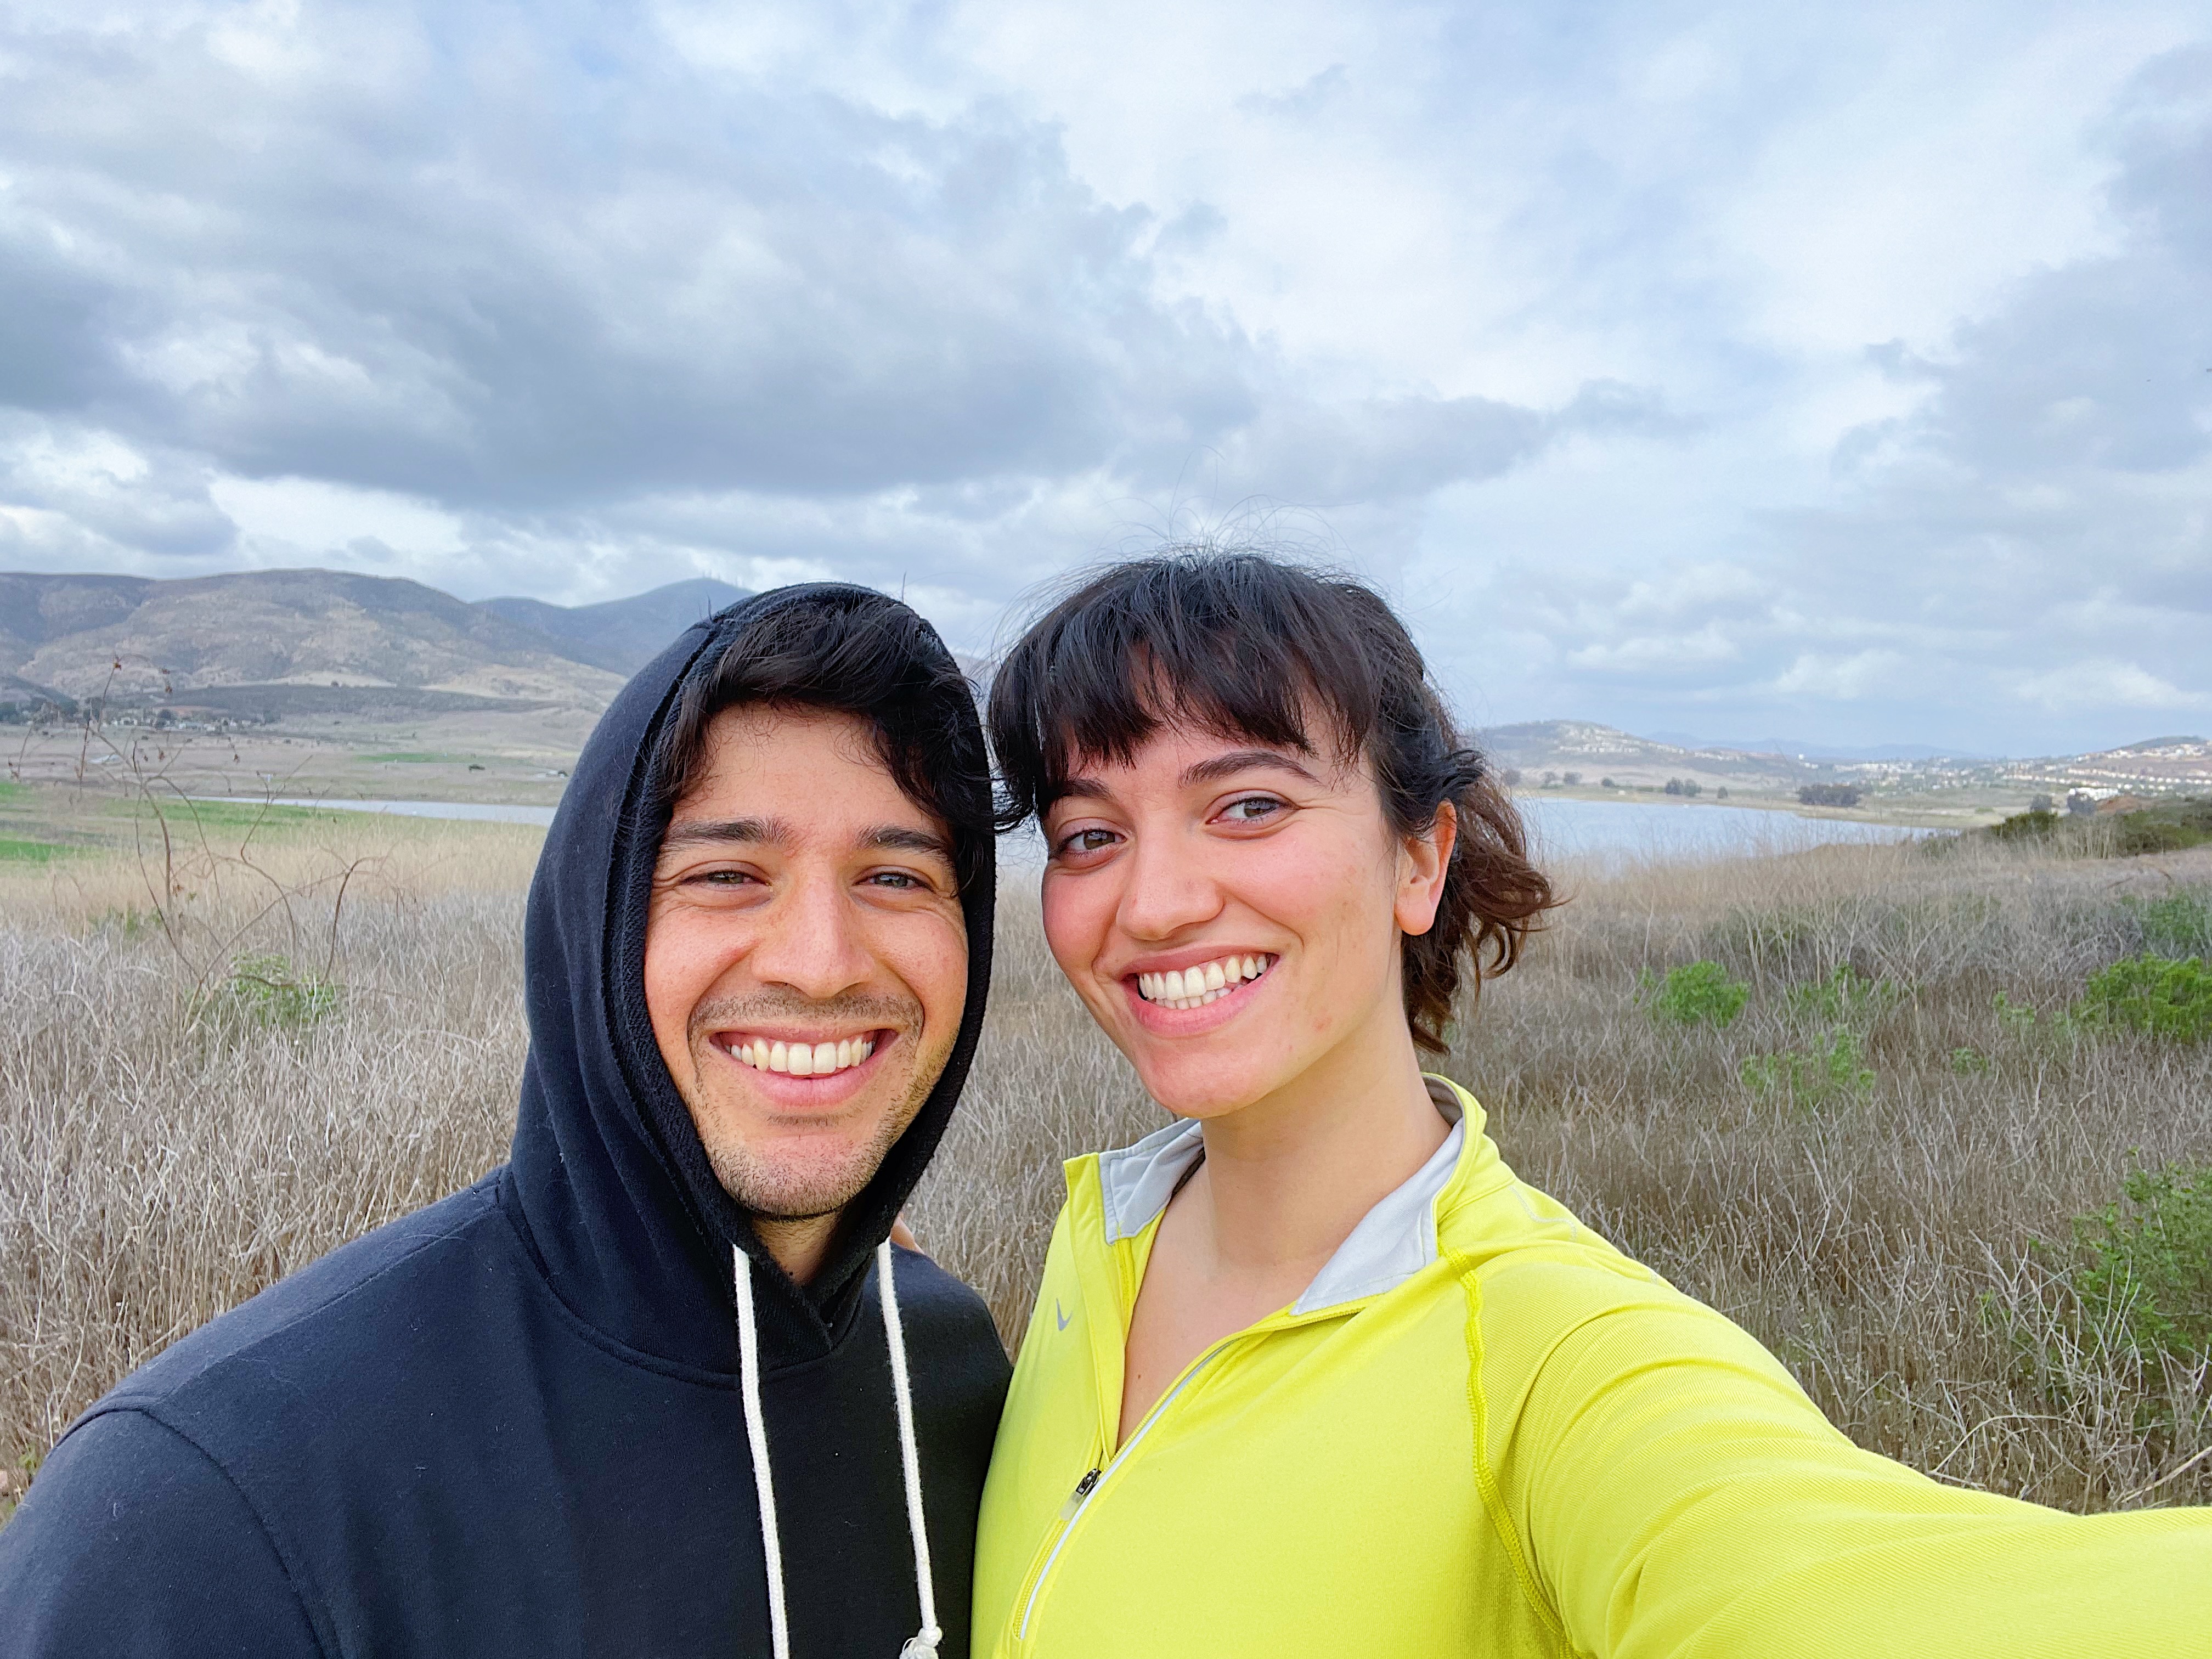 Go hiking for a fun, budget friendly day date idea